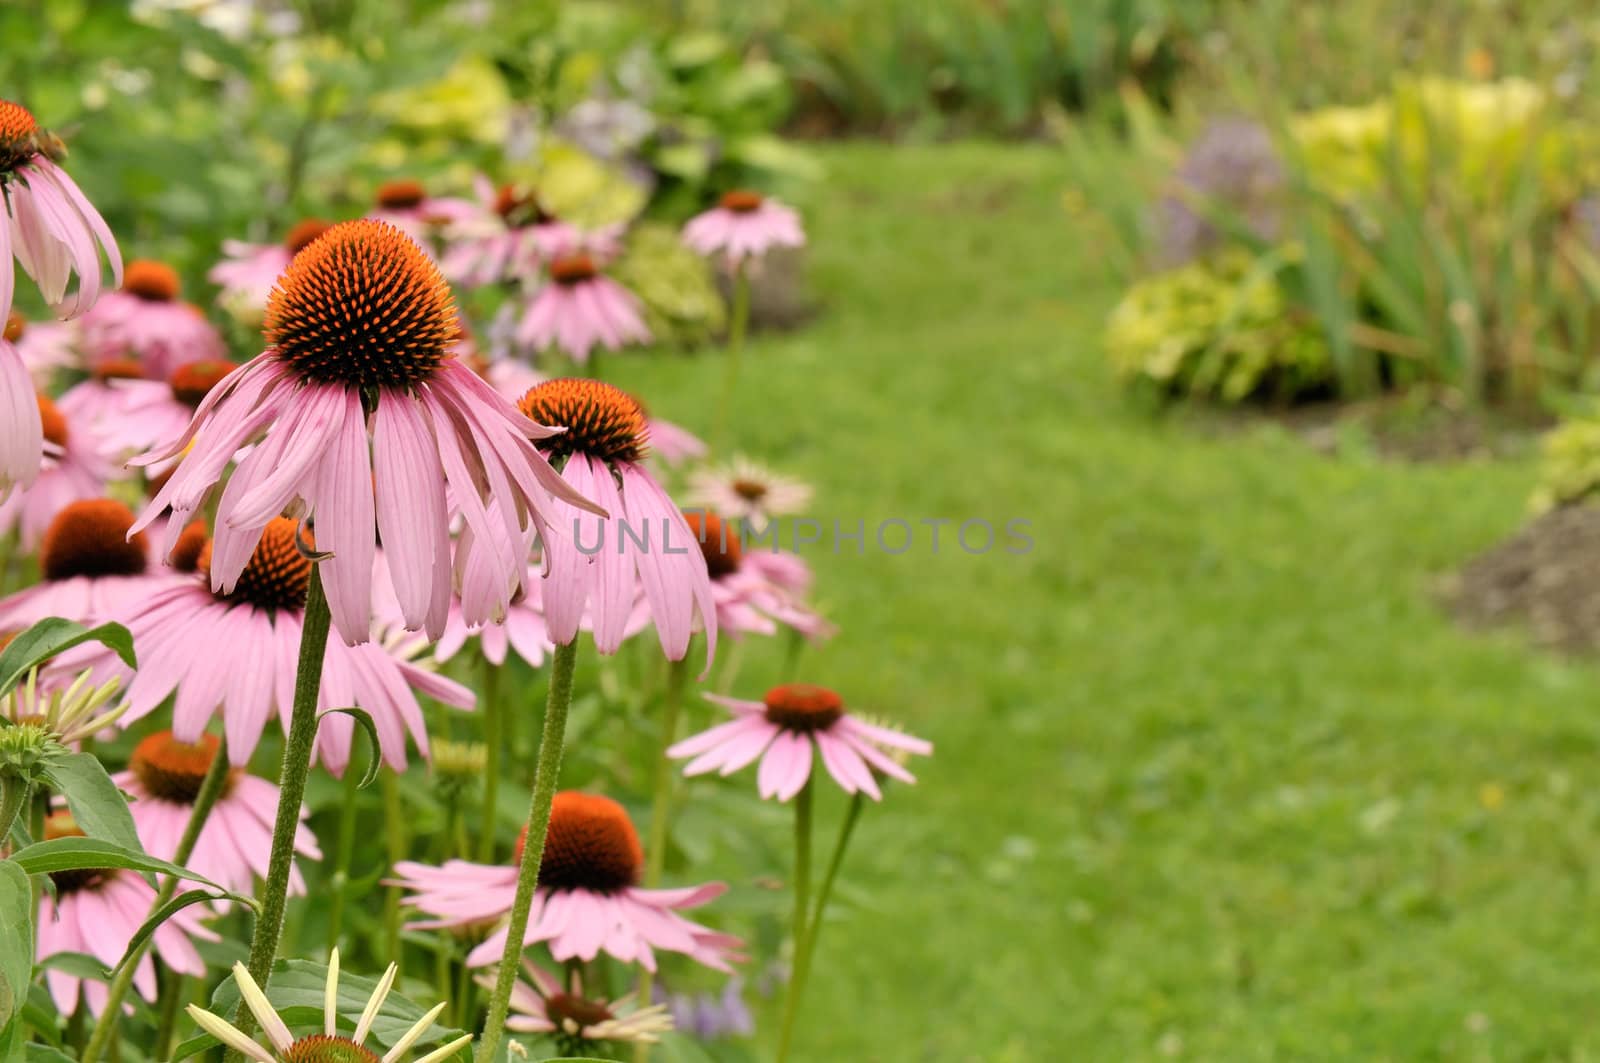 Garden scene with blooming cone flowers and path - Shallow depth of field